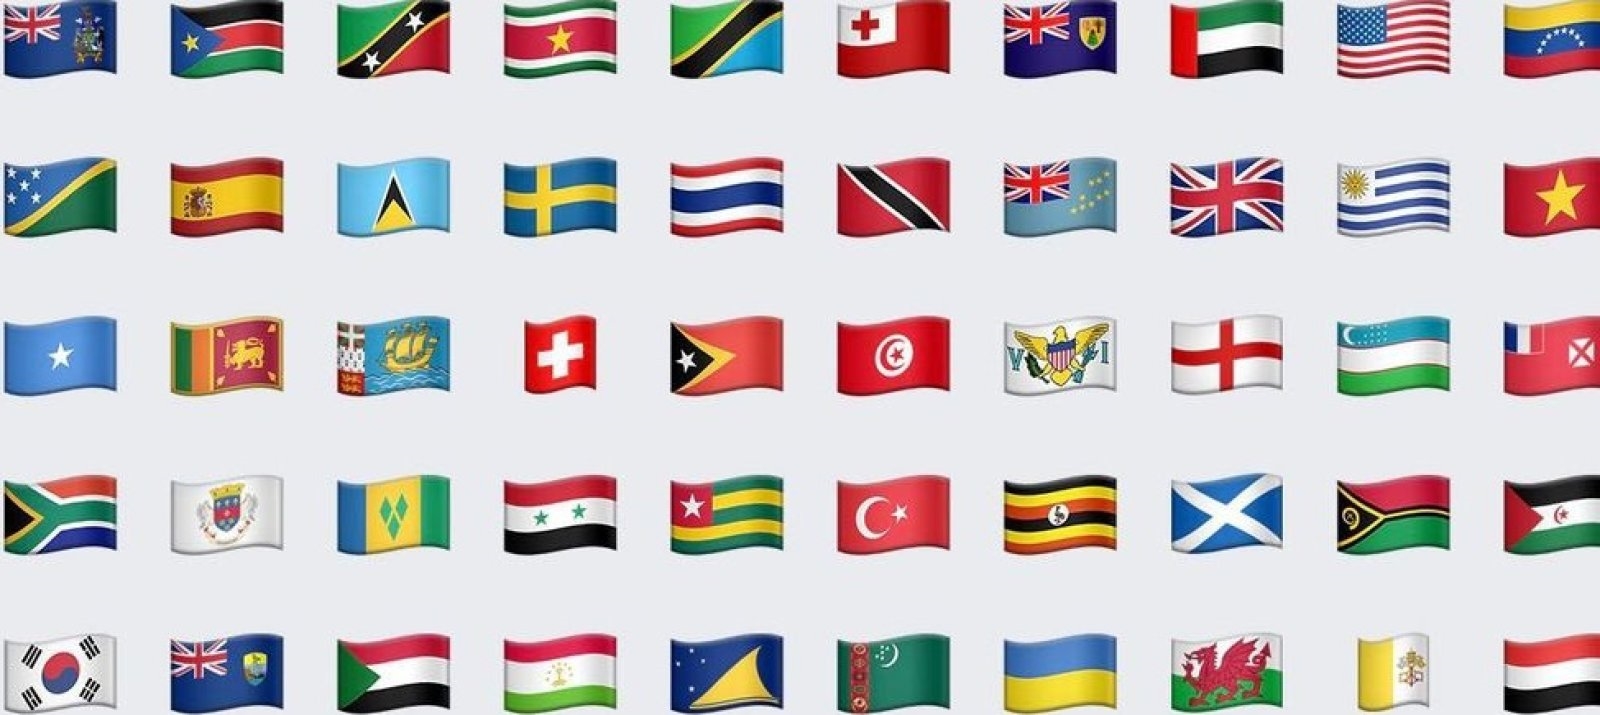 Apple removes Taiwan flag emoji from iOS in Hong Kong | DeviceDaily.com